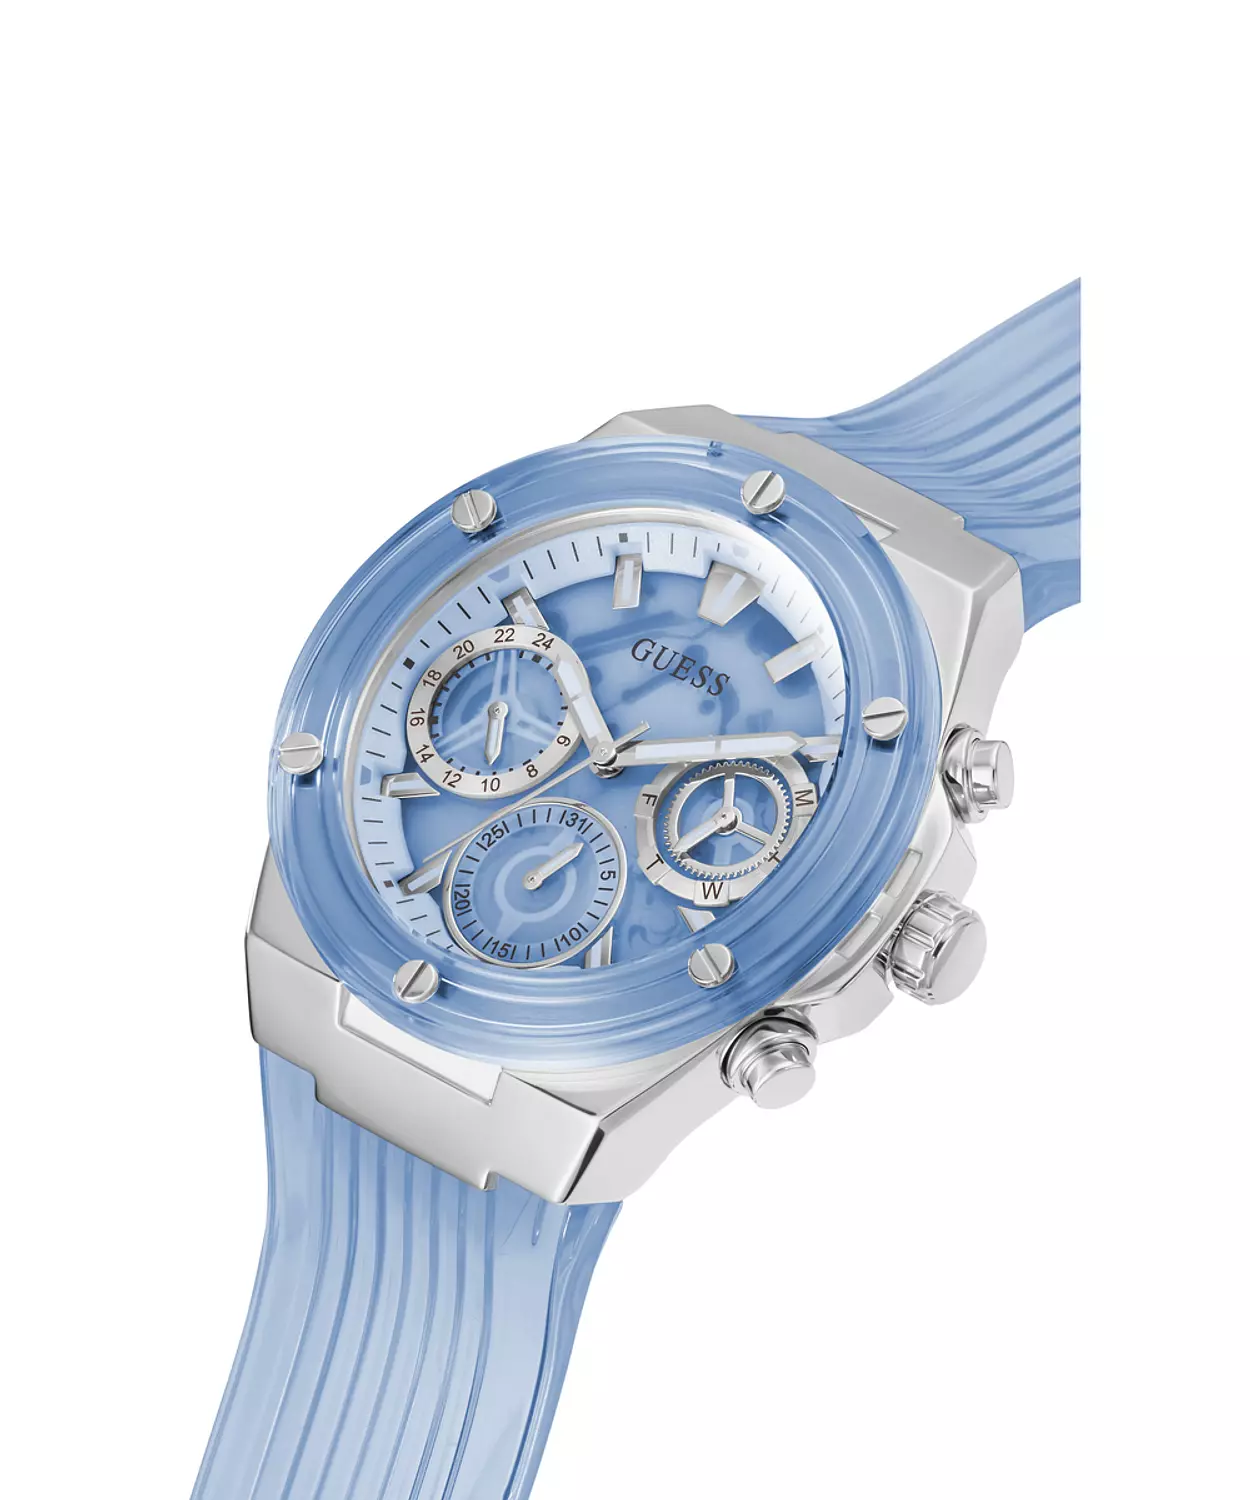 GUESS GW0409L1 ANALOG WATCH  For Women BlueBio-based PU Textured Strap  3